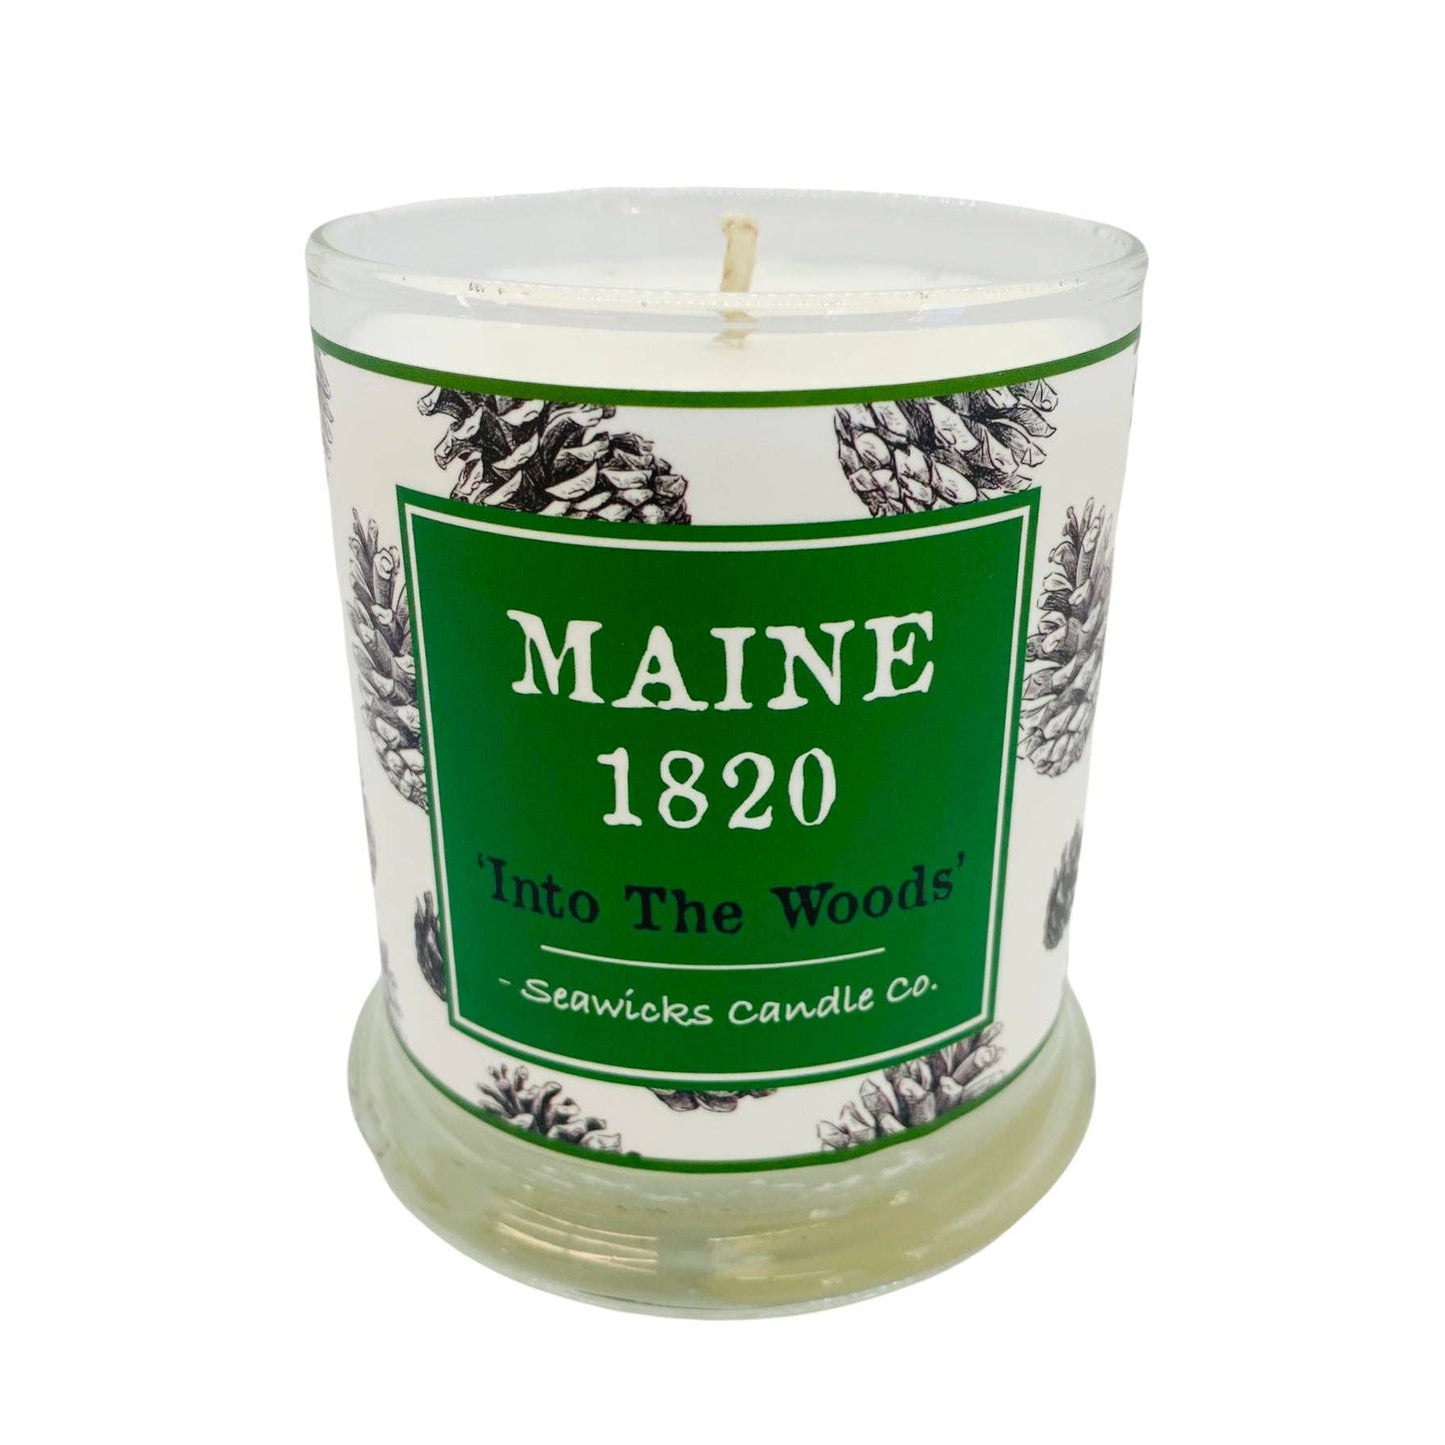 Maine 1820 - Soy Candle by Seawicks Candle Company